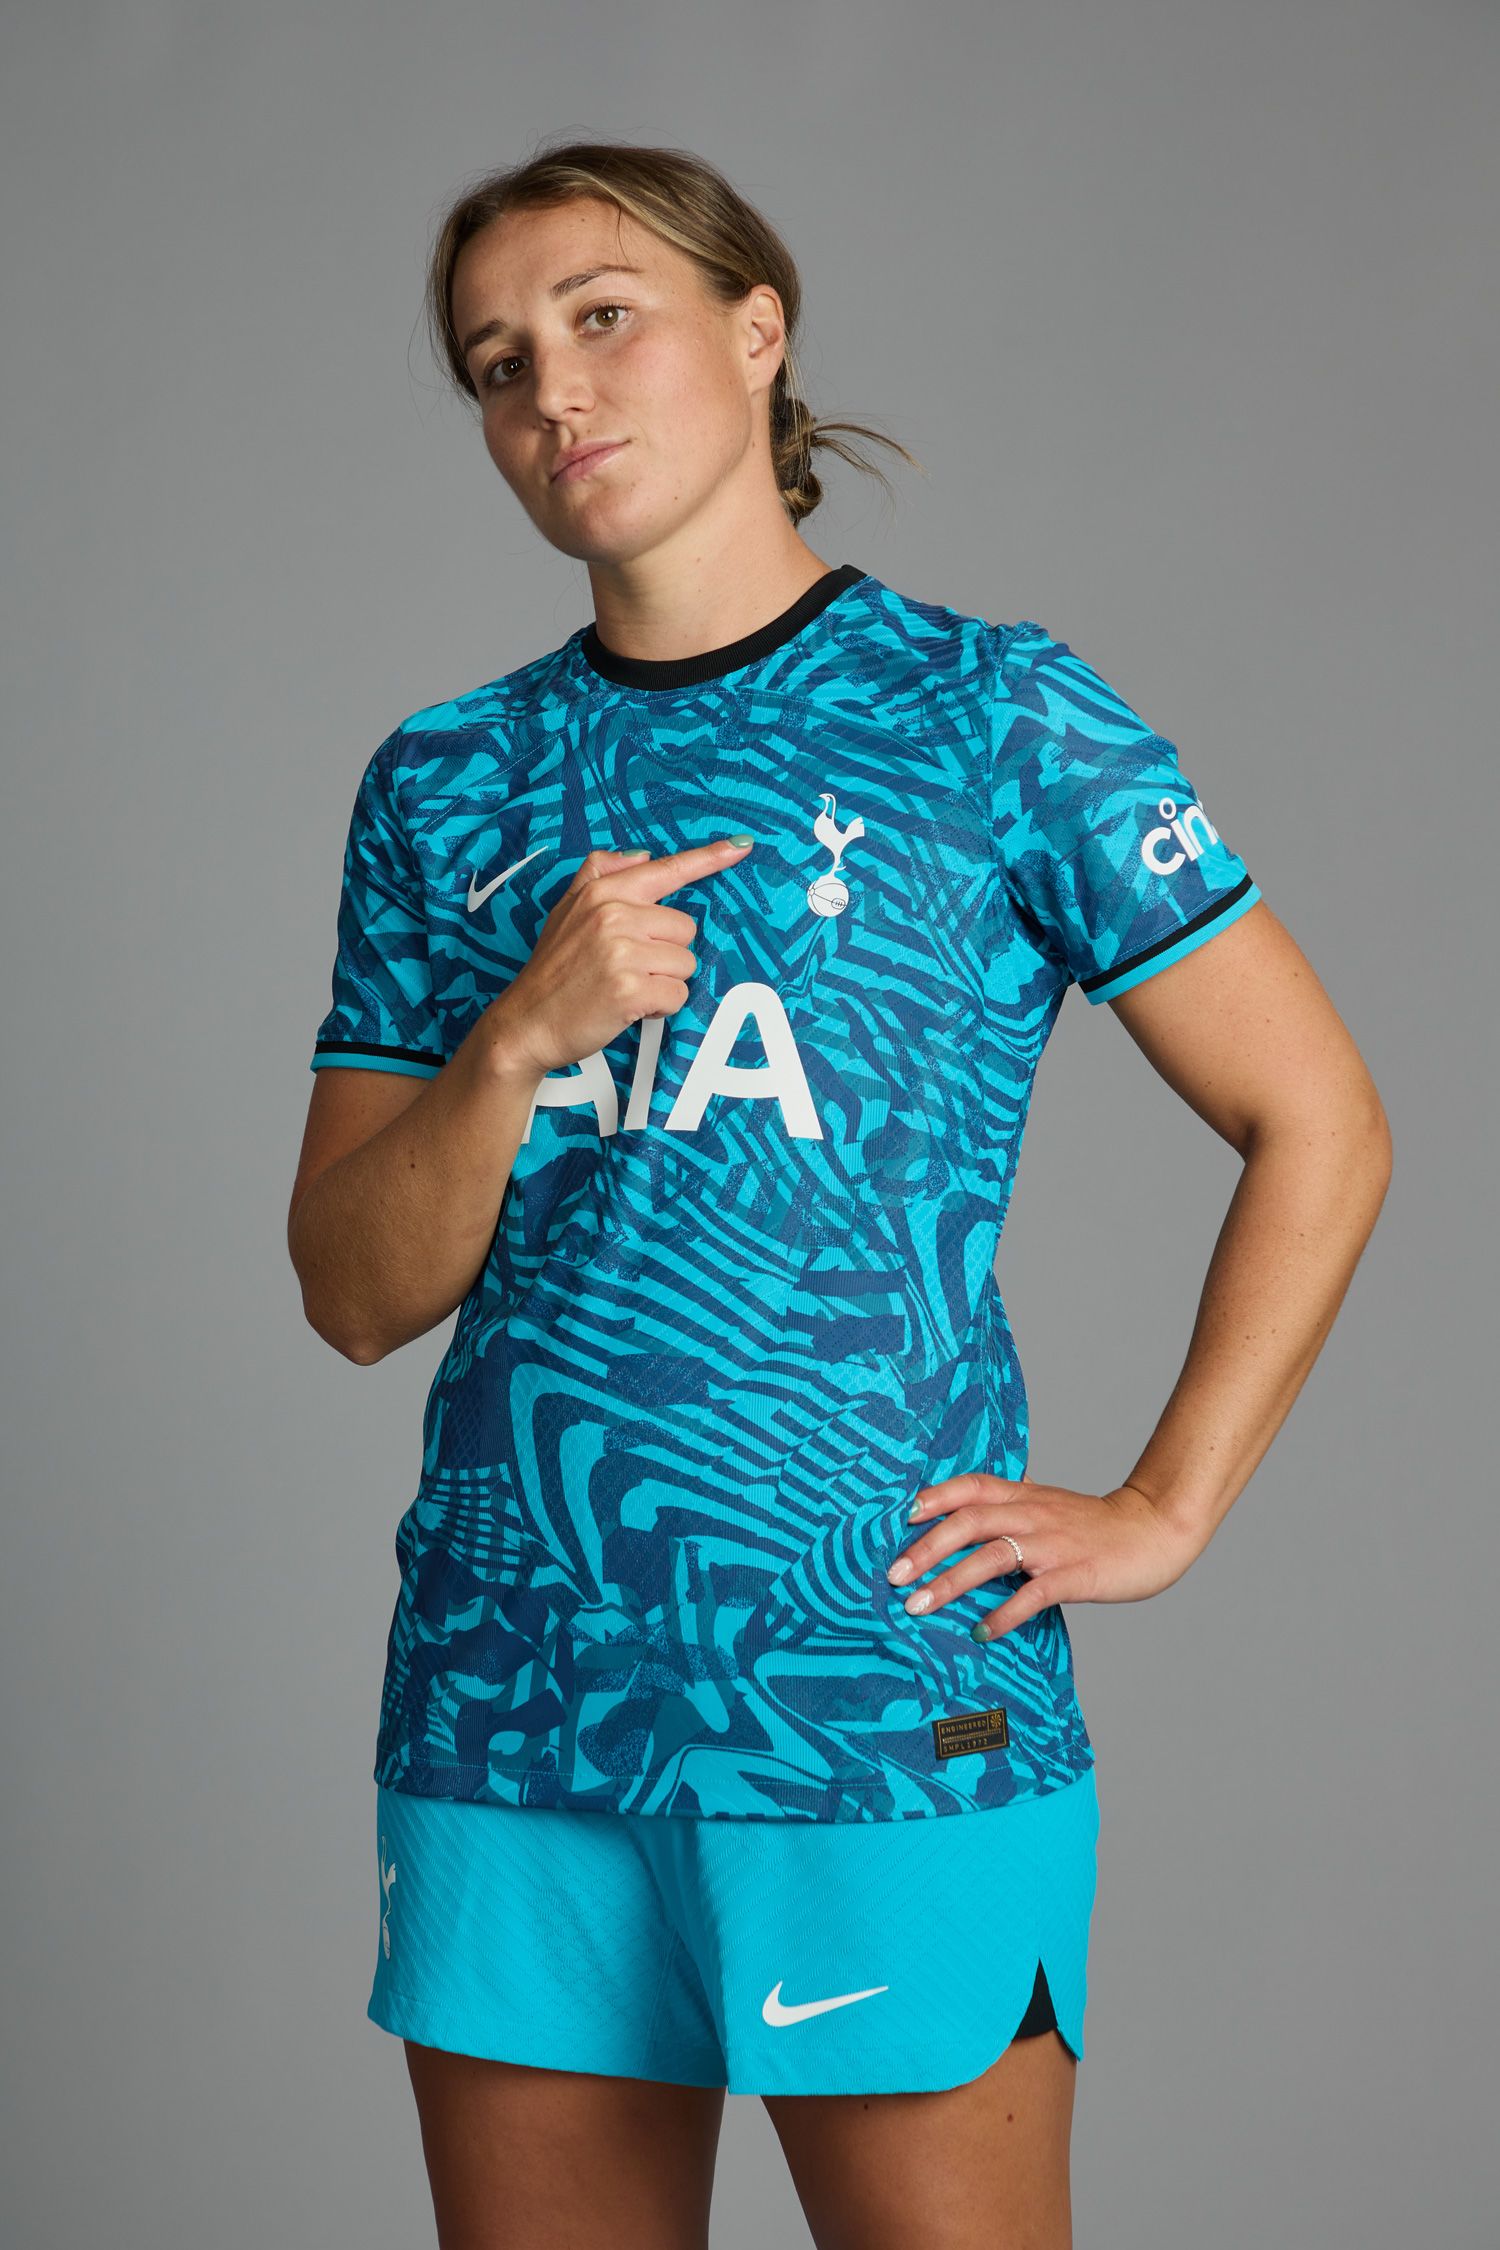 Dare To Do True – 2022/23 Nike Home Kit unveiled